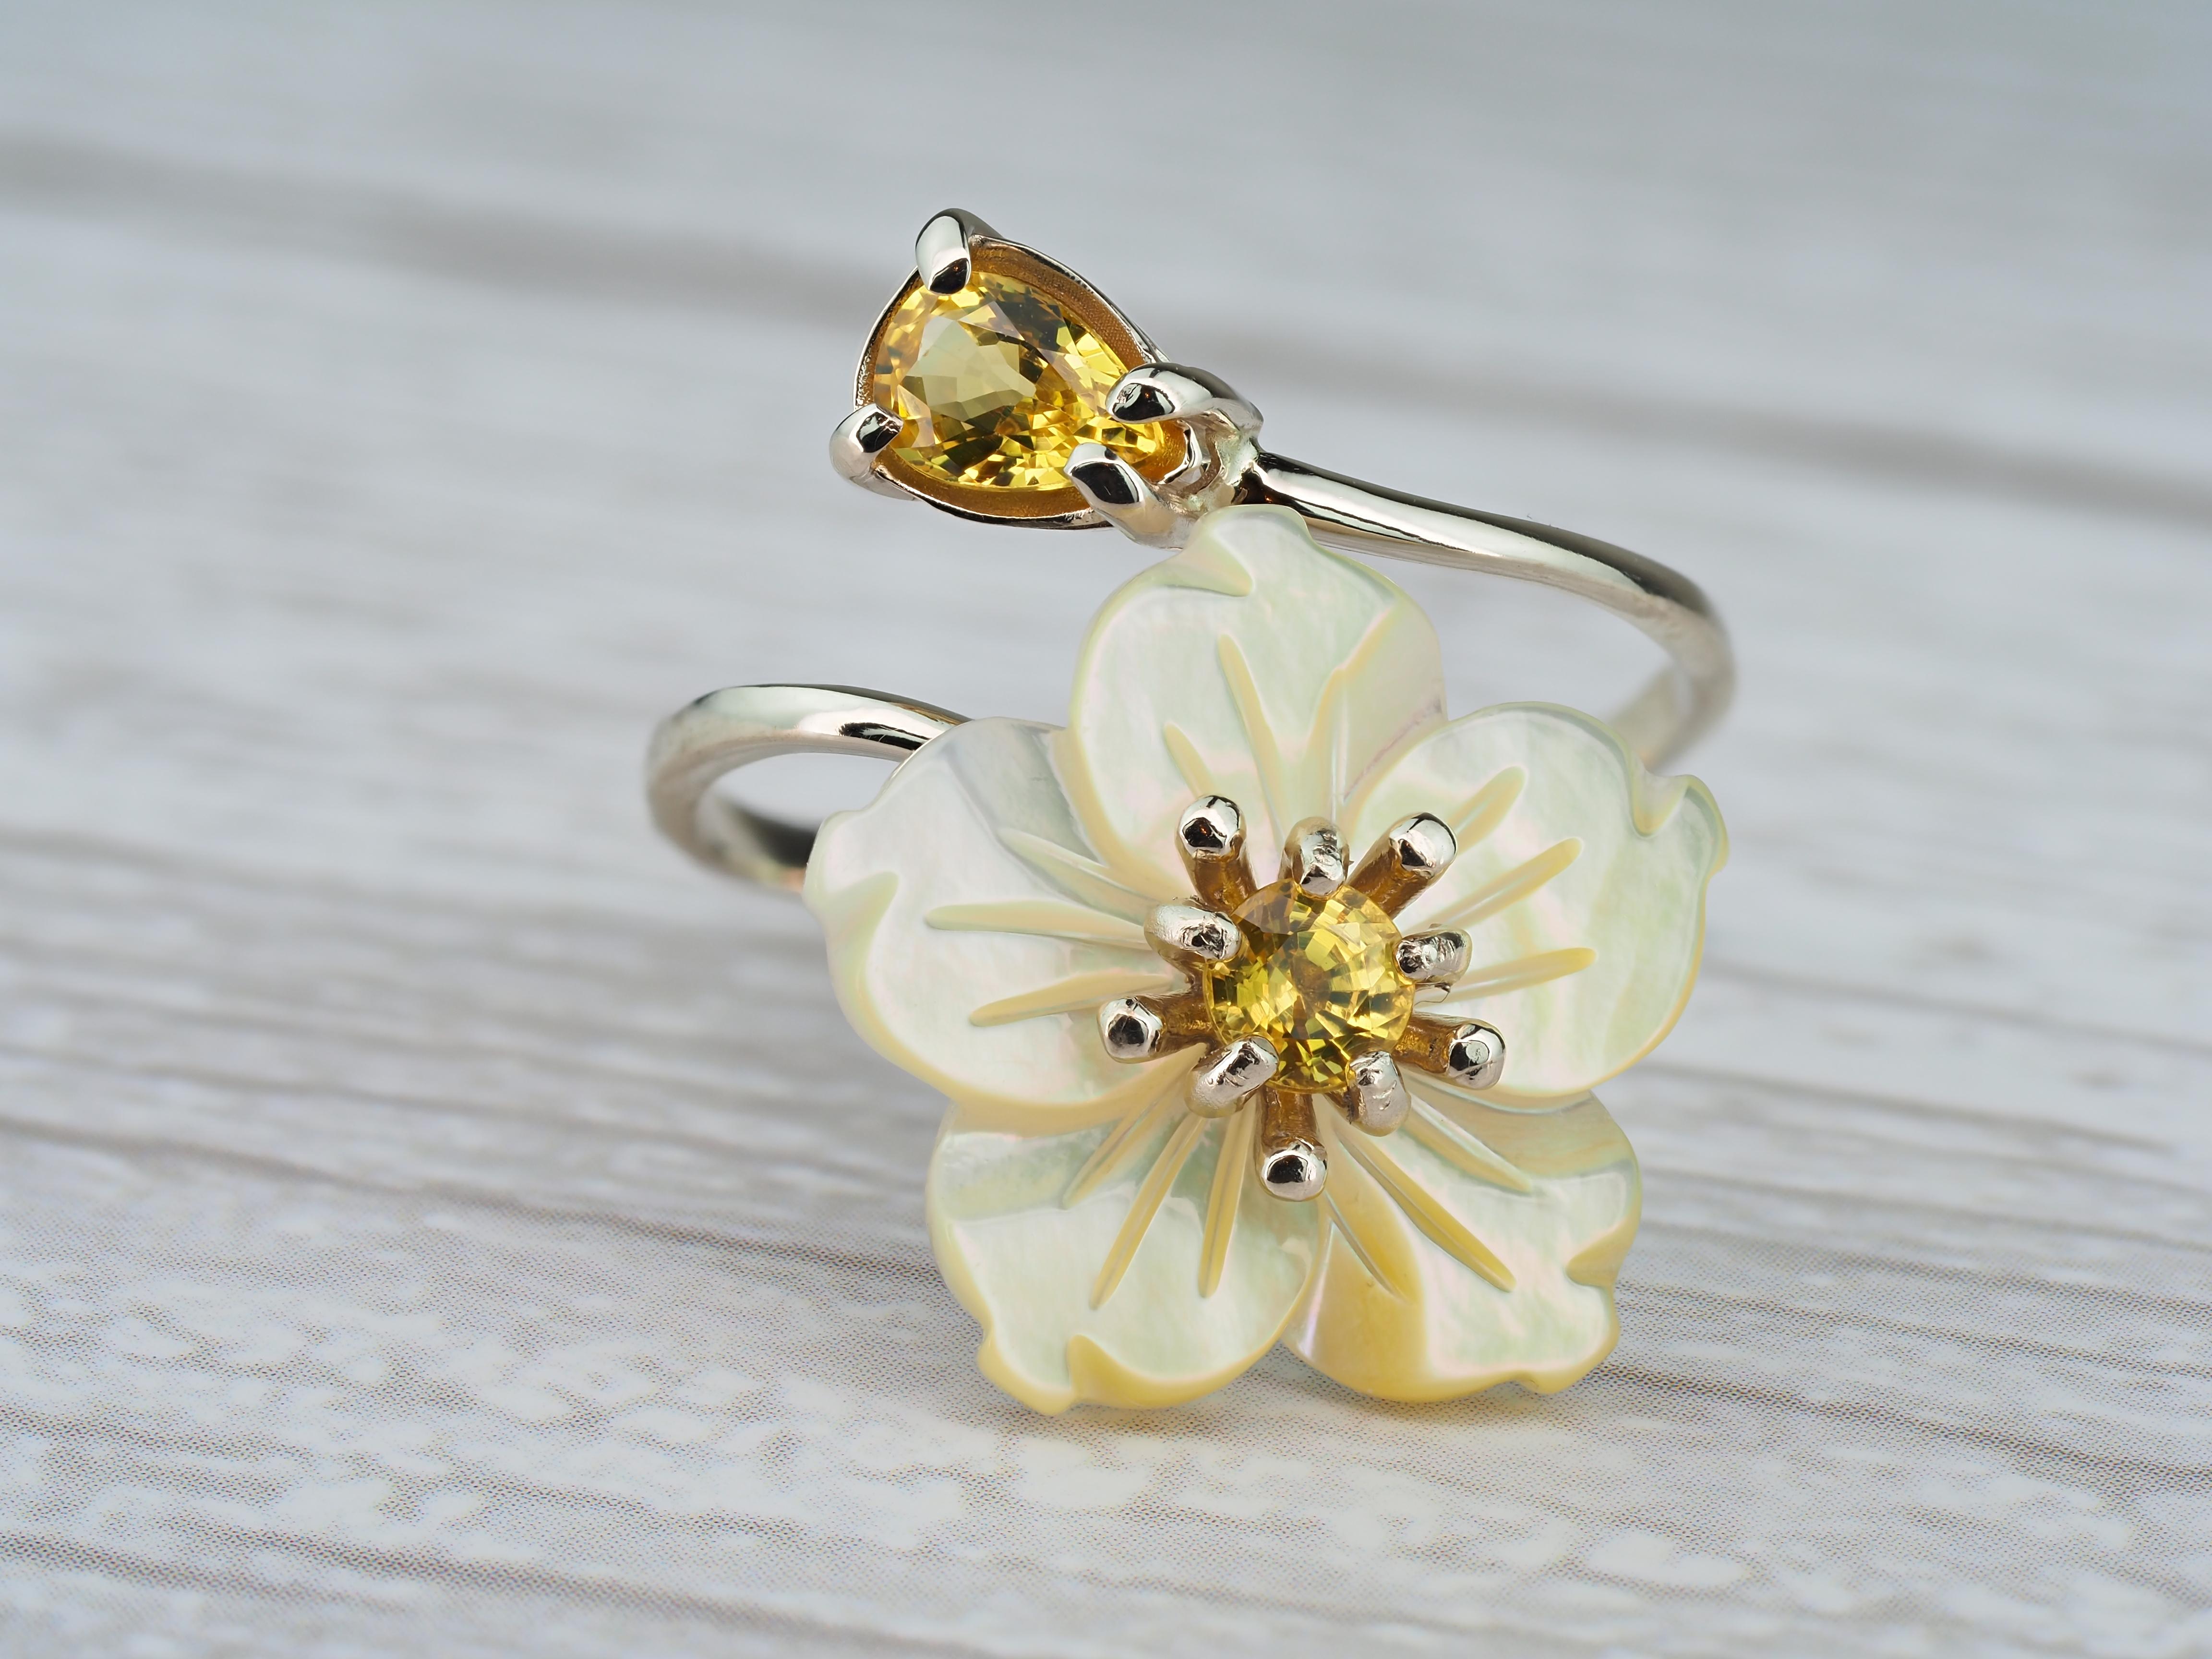 For Sale:  Yellow Sapphire Ring in 14k Gold, Genuine Sapphire Gold Ring 8